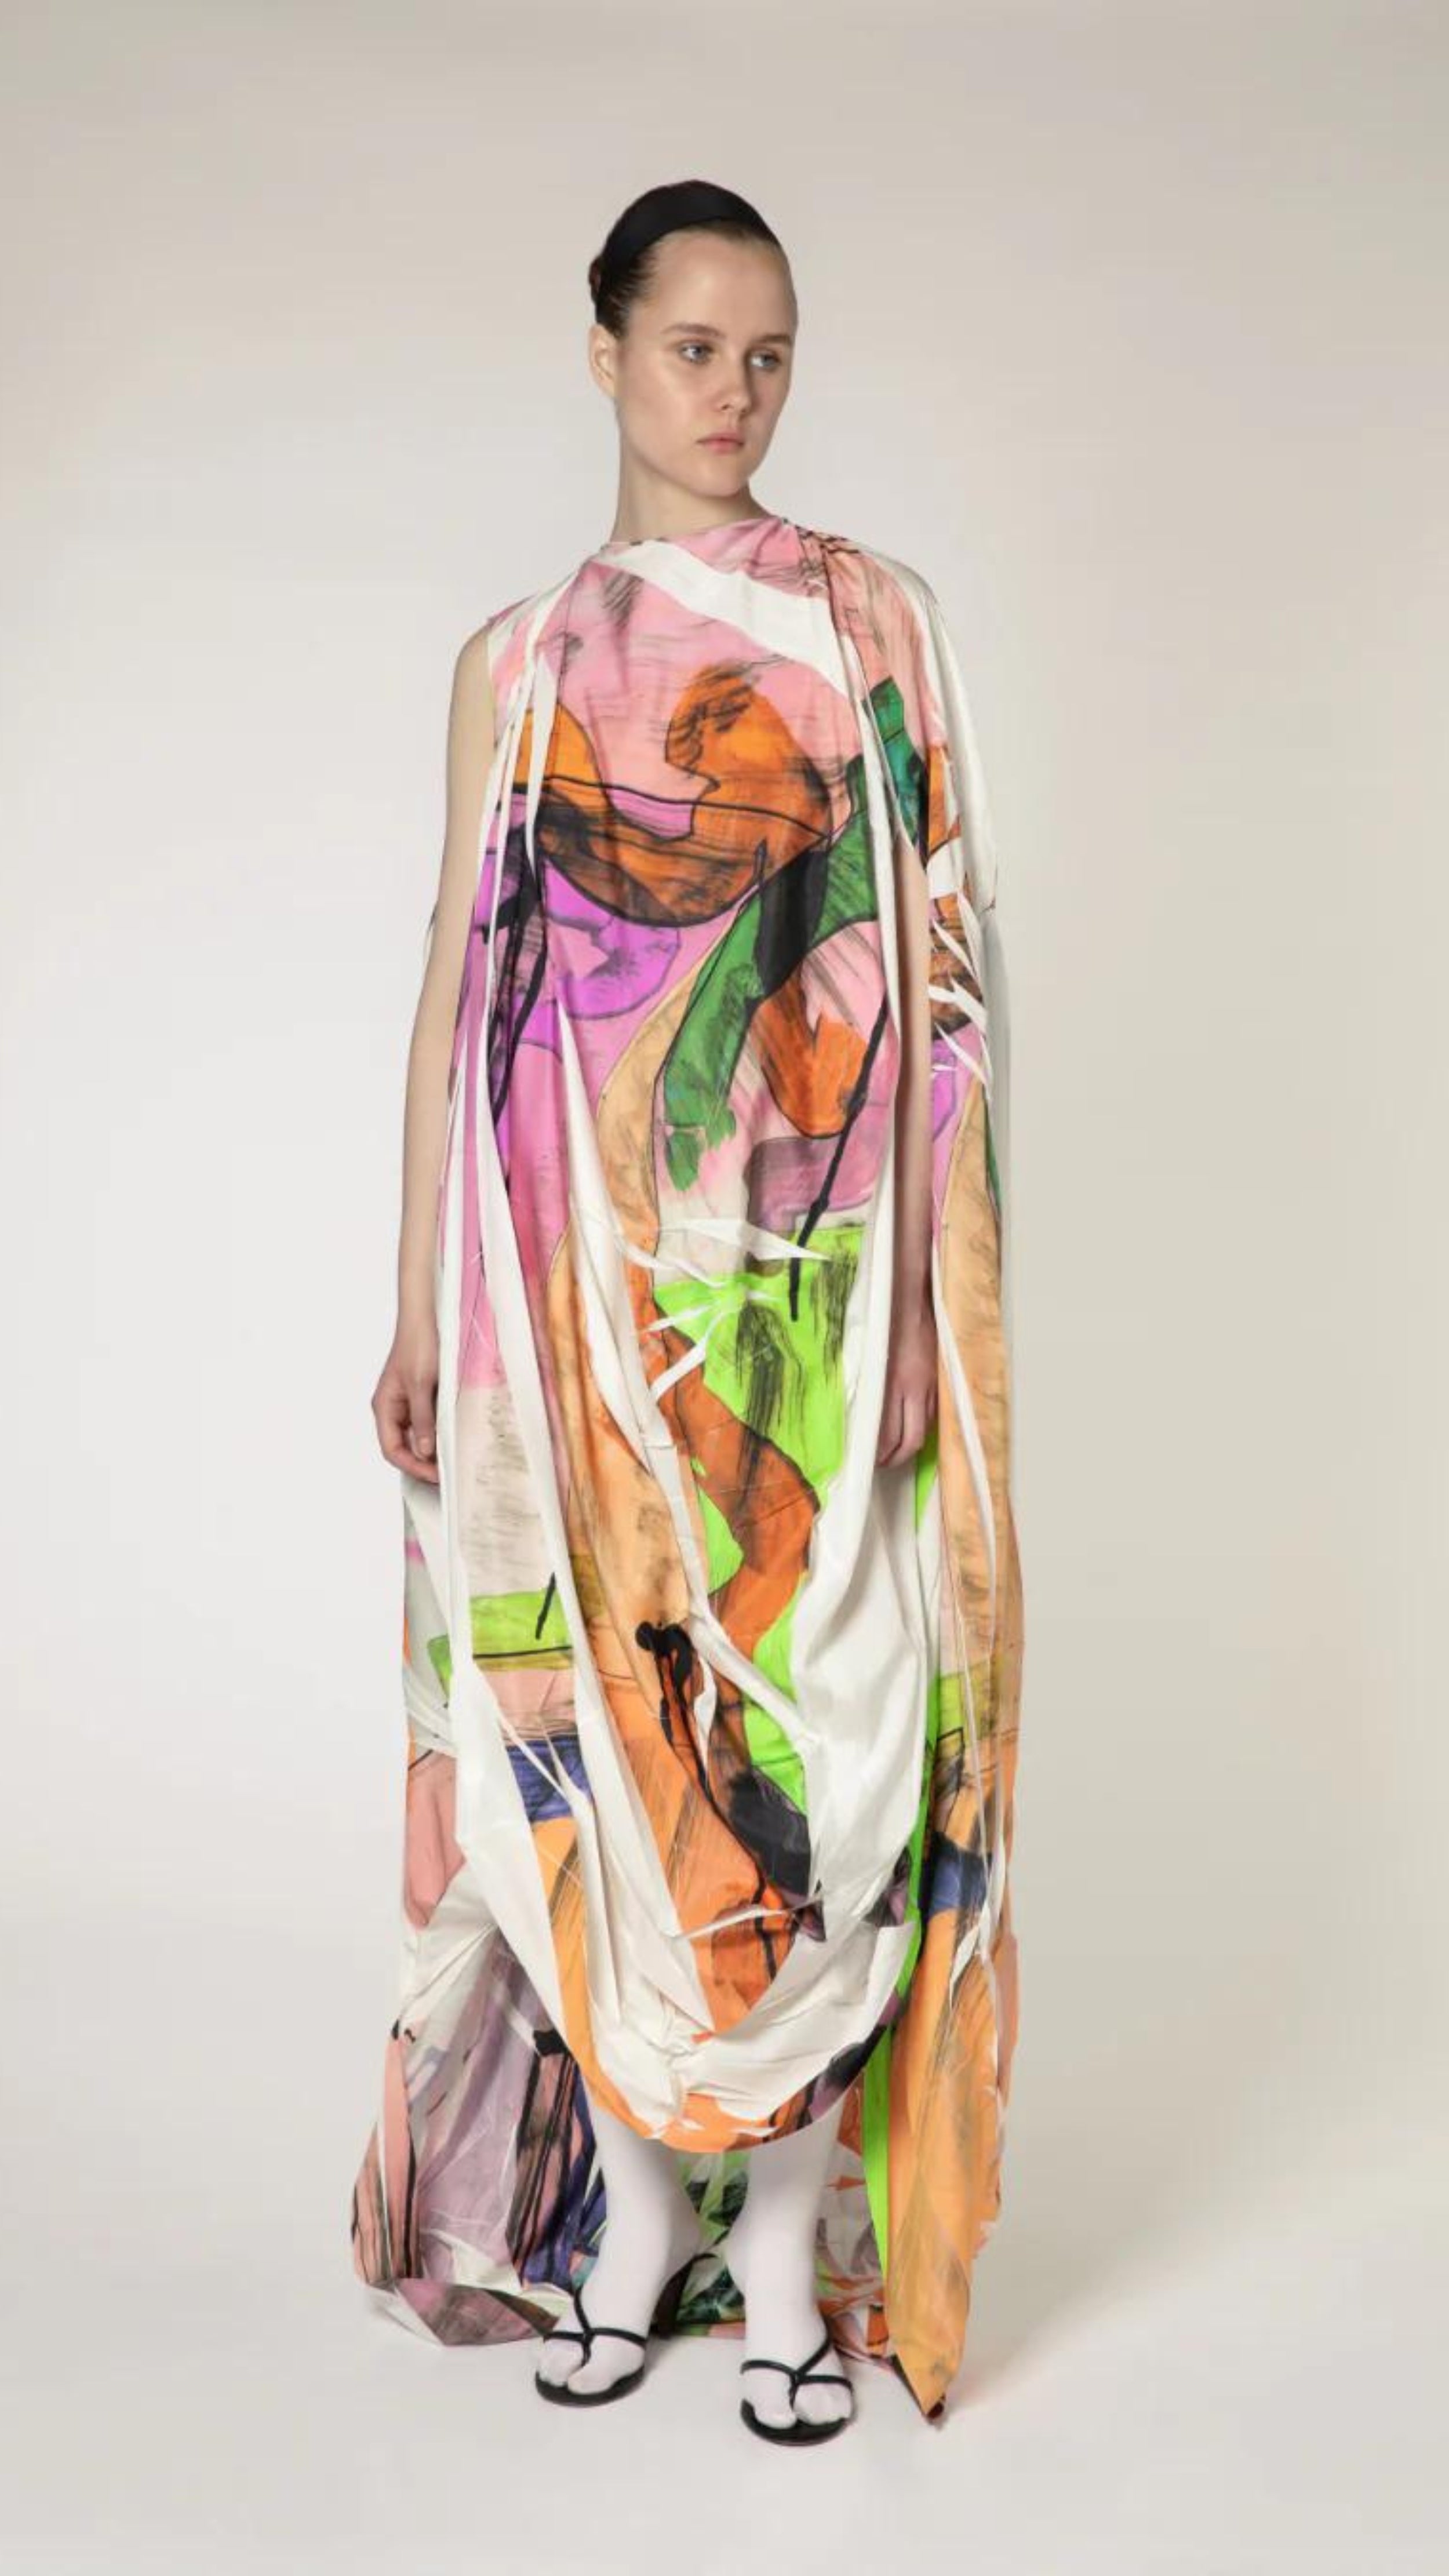 Roksanda Arletta Dress. Limited edition one of ten pieces created. Hand printed on parachute fabrics for an original pattern and designer of pinks, oranges, greens and white. Draped front with front belt and cape like back. Long maxi dress for evening gown looks. Shown on model facing front.